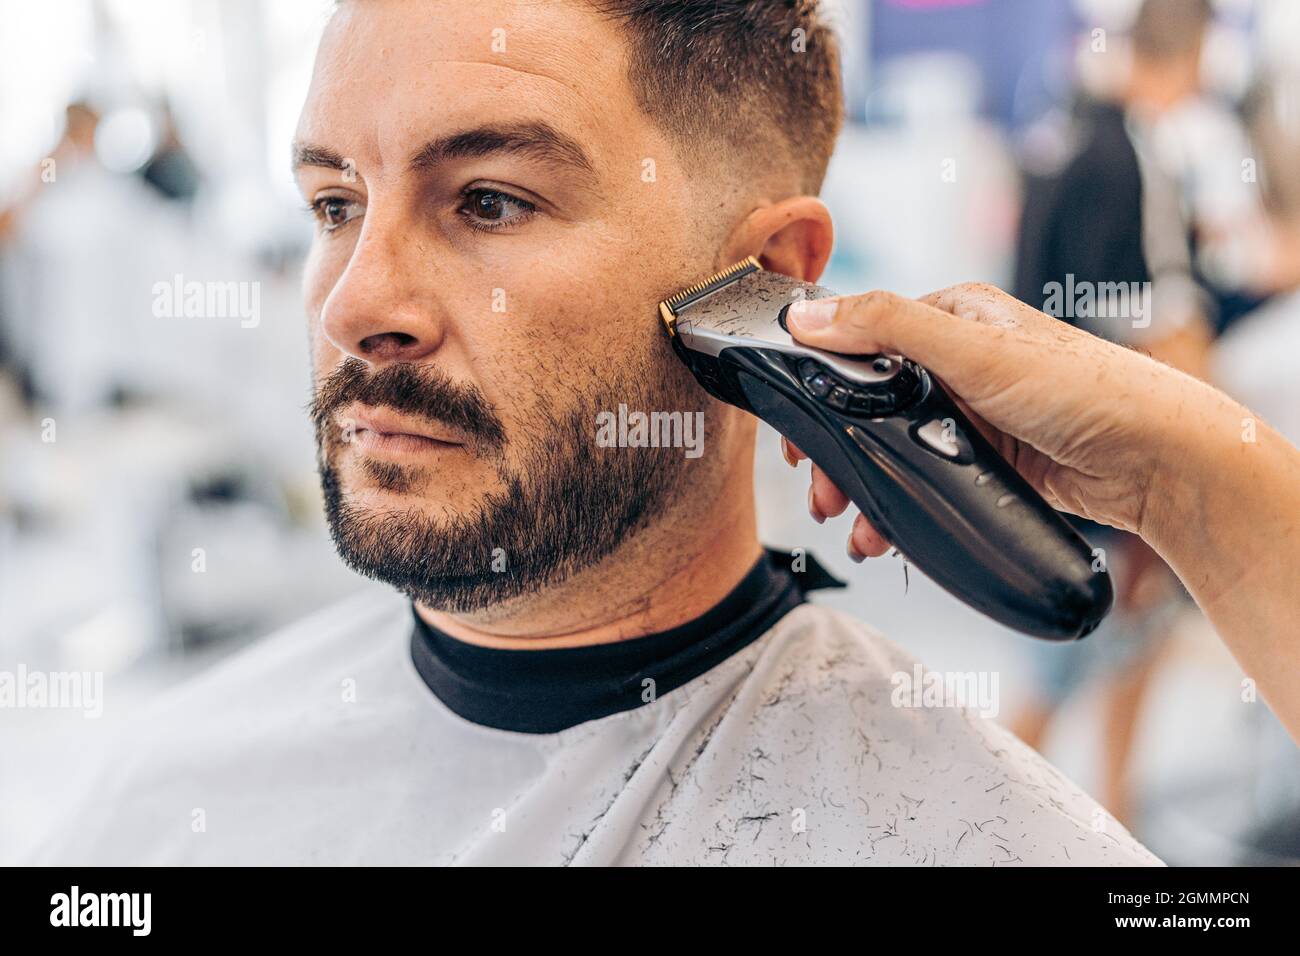 Portrait of a man being shaved in a barbershop Stock Photo